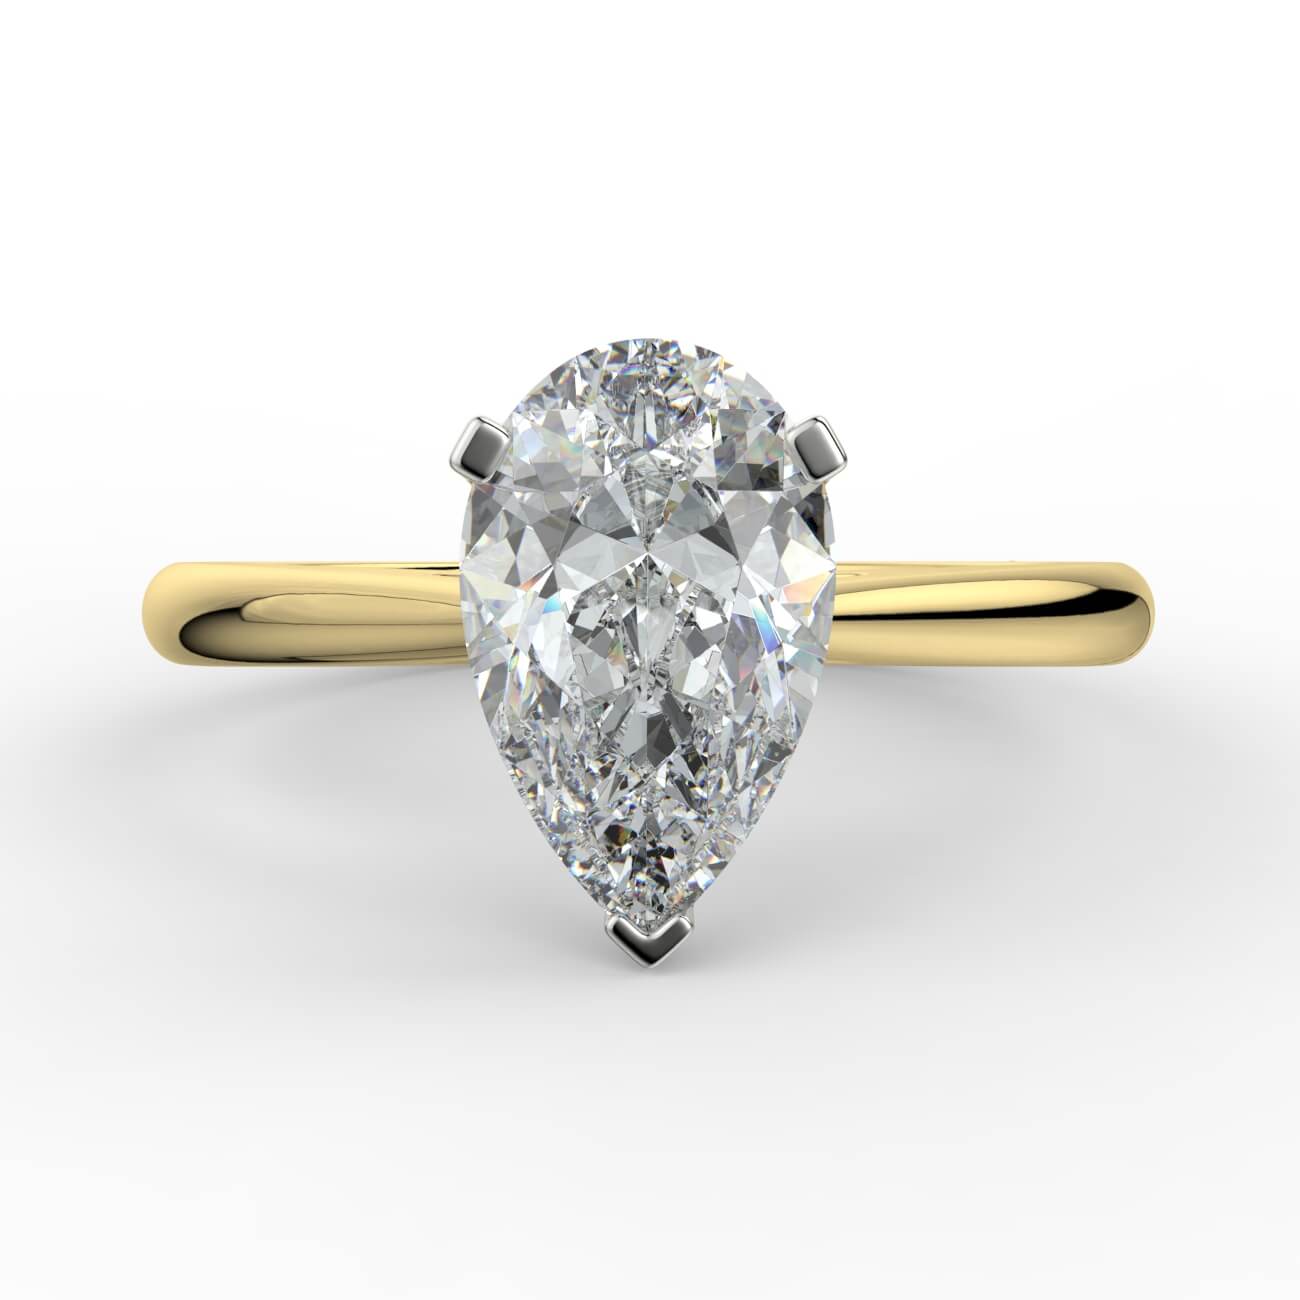 Pear cut diamond cathedral engagement ring in yellow and white gold – Australian Diamond Network